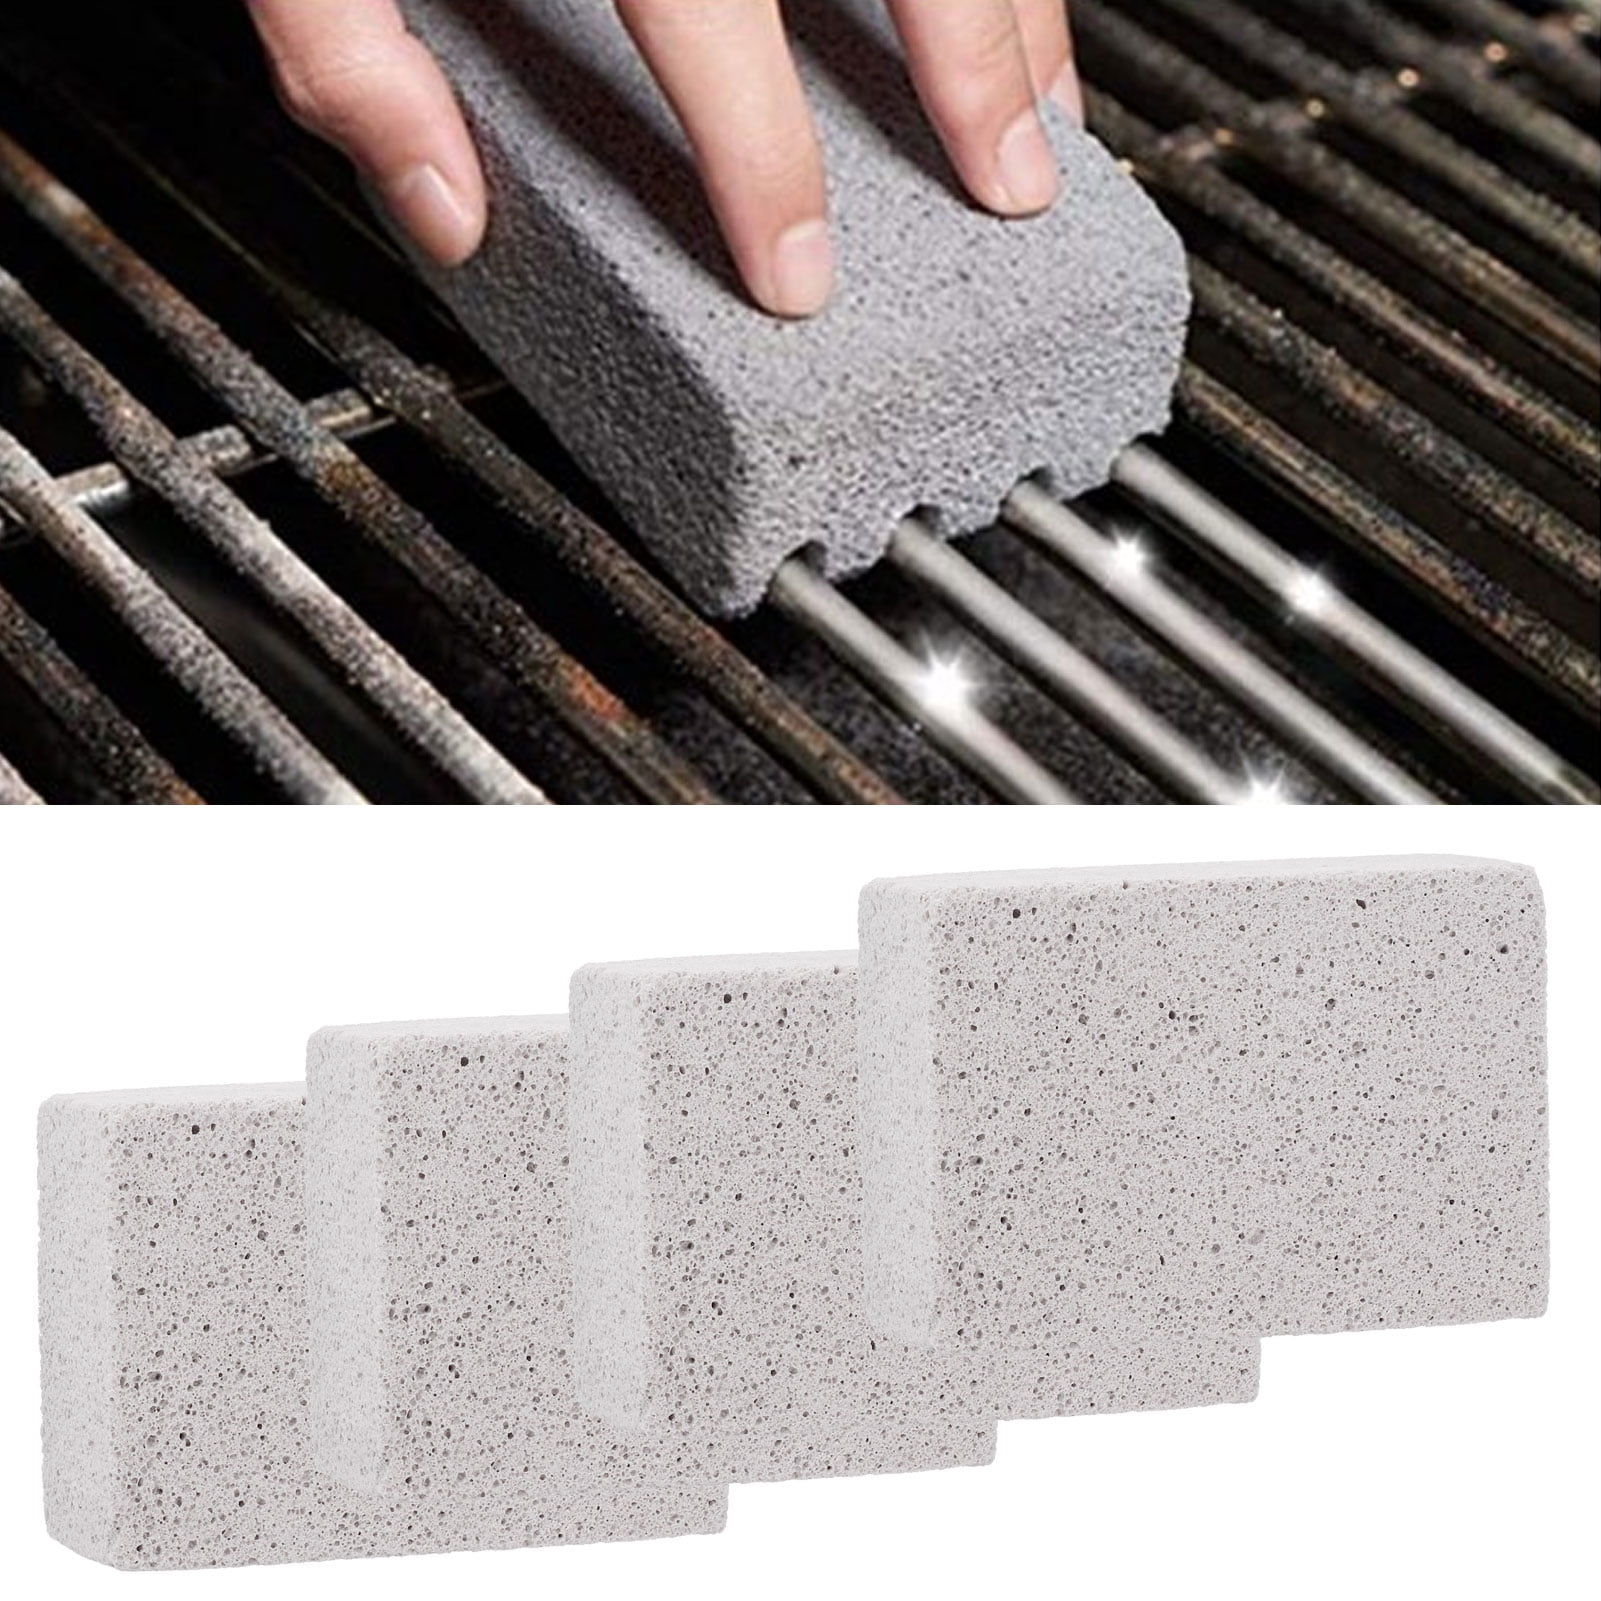 for Barbecue BBQ Grill Cleaning Tool Griddle Pumice stone Brick 3.9x1.5x2.8inch 